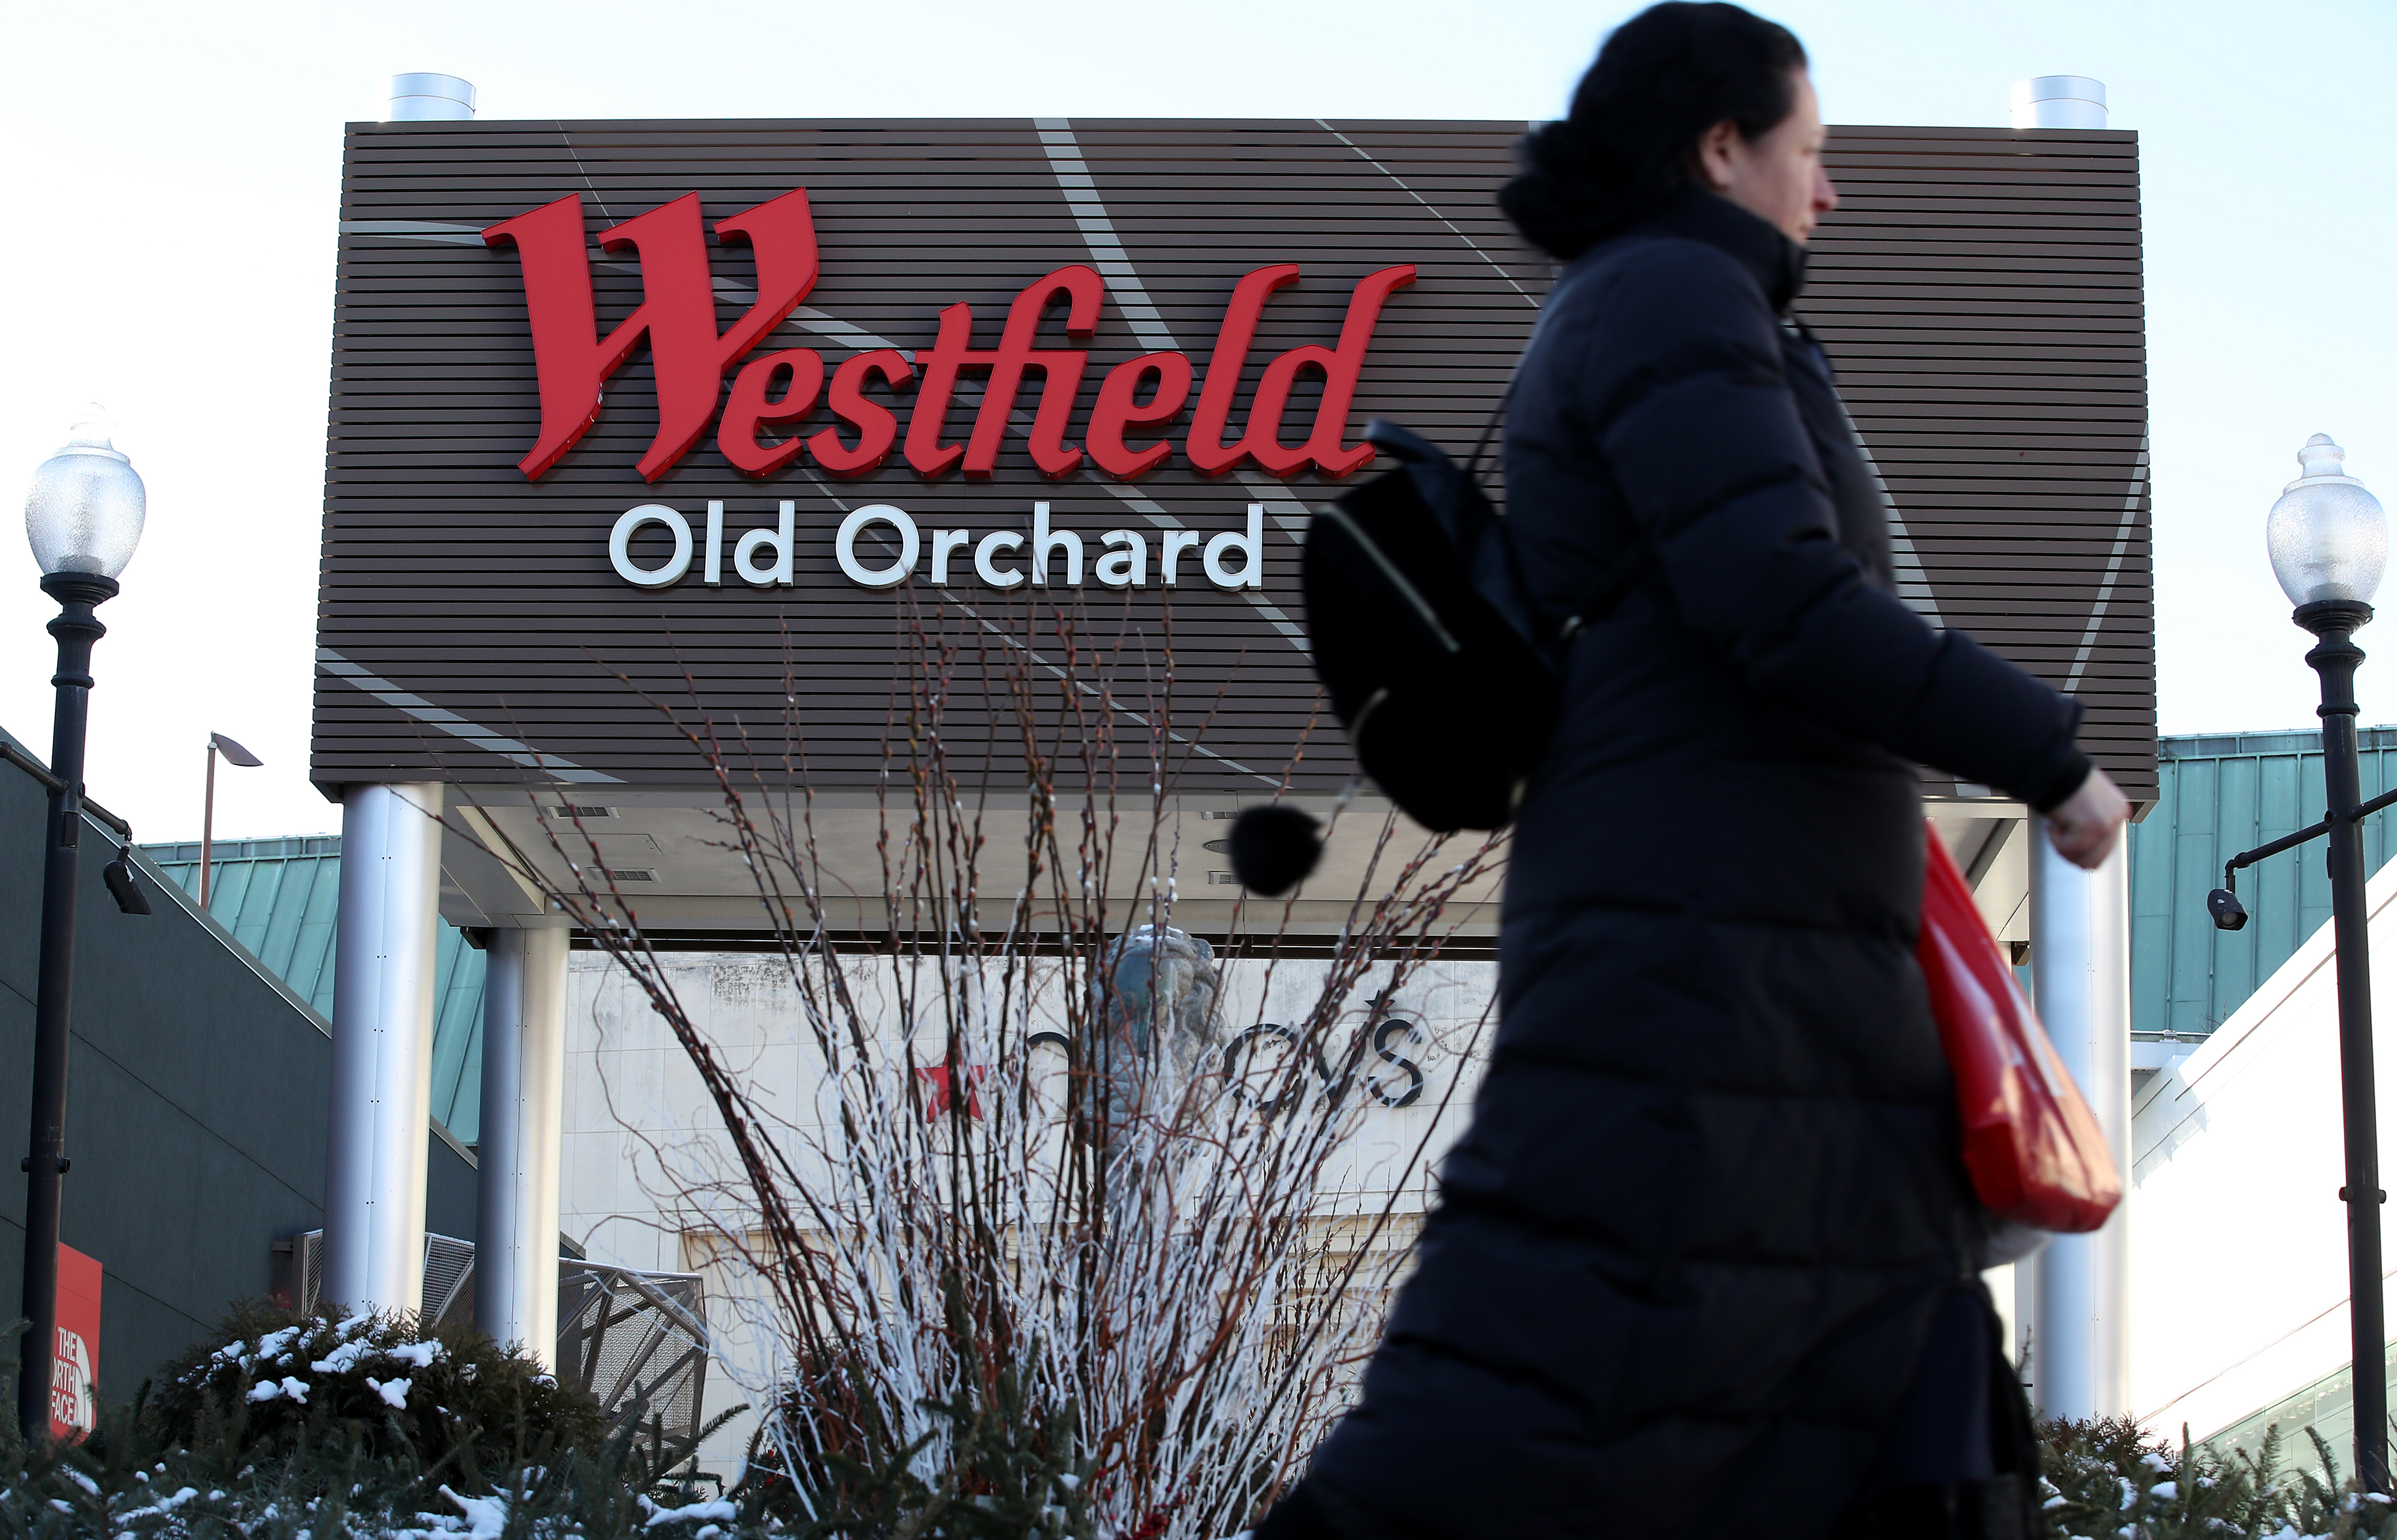 Go Shop: Westfield Old Orchard